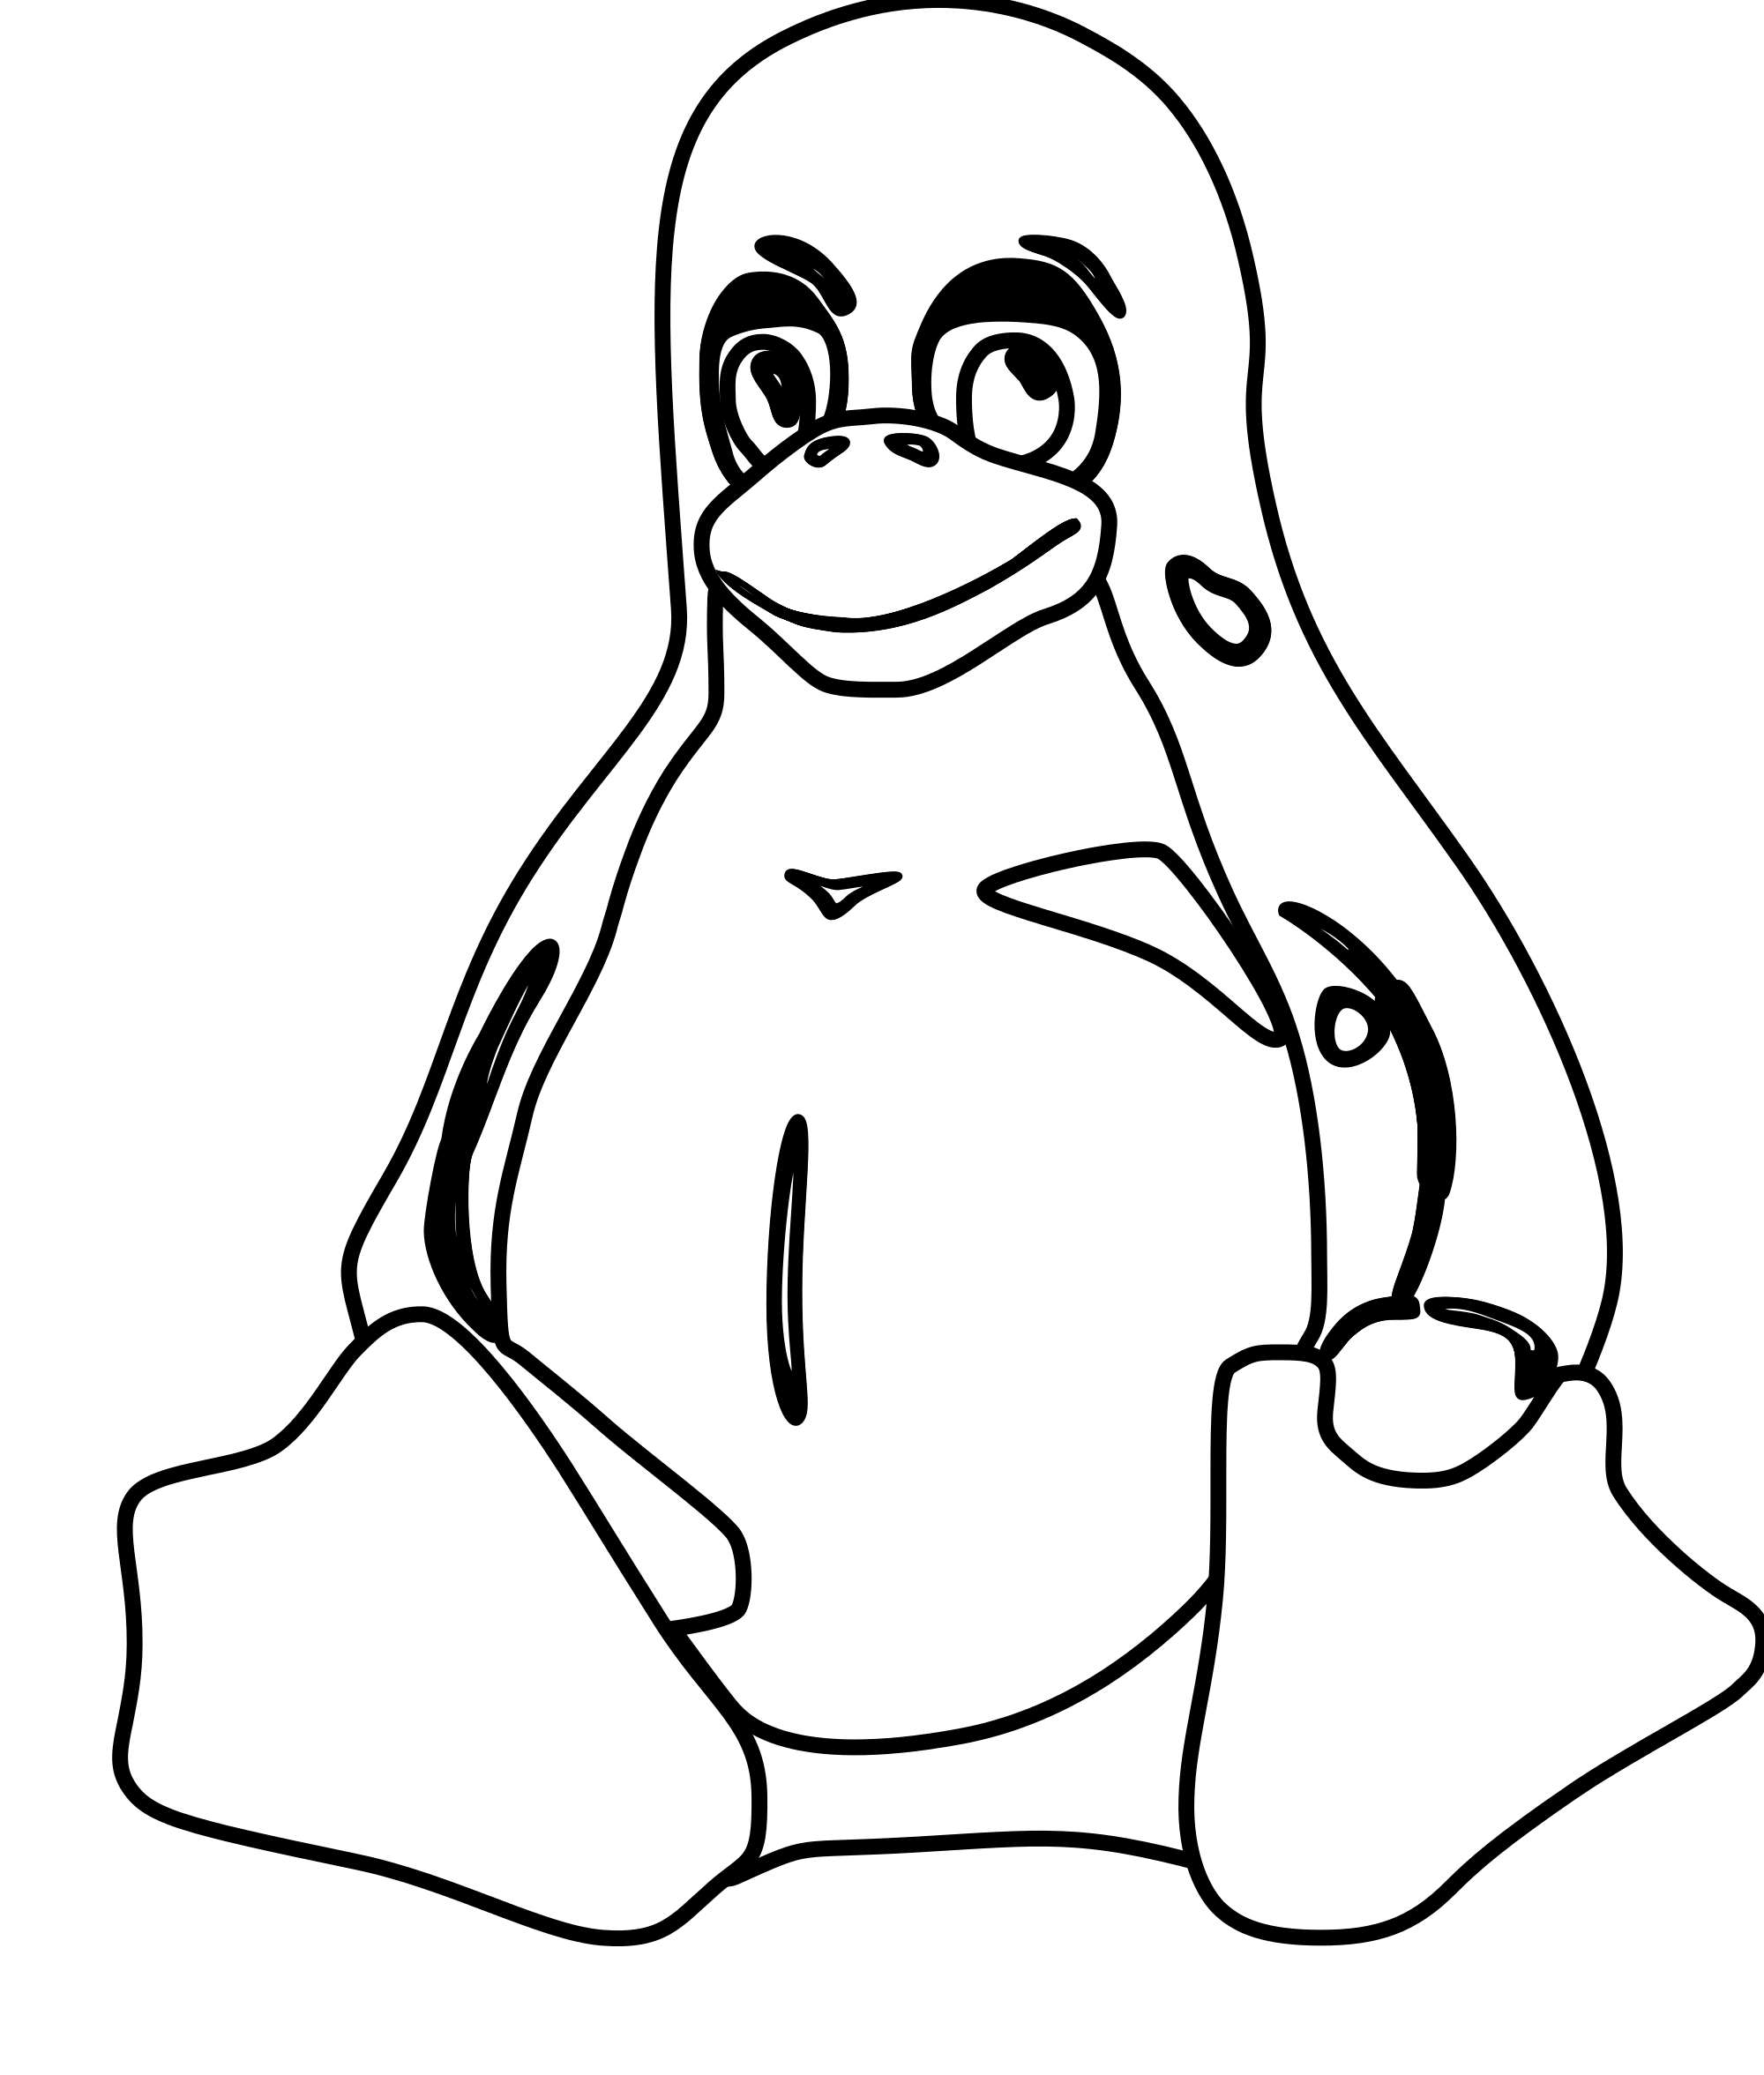 Clipart penquin button. Penguin outline drawing at